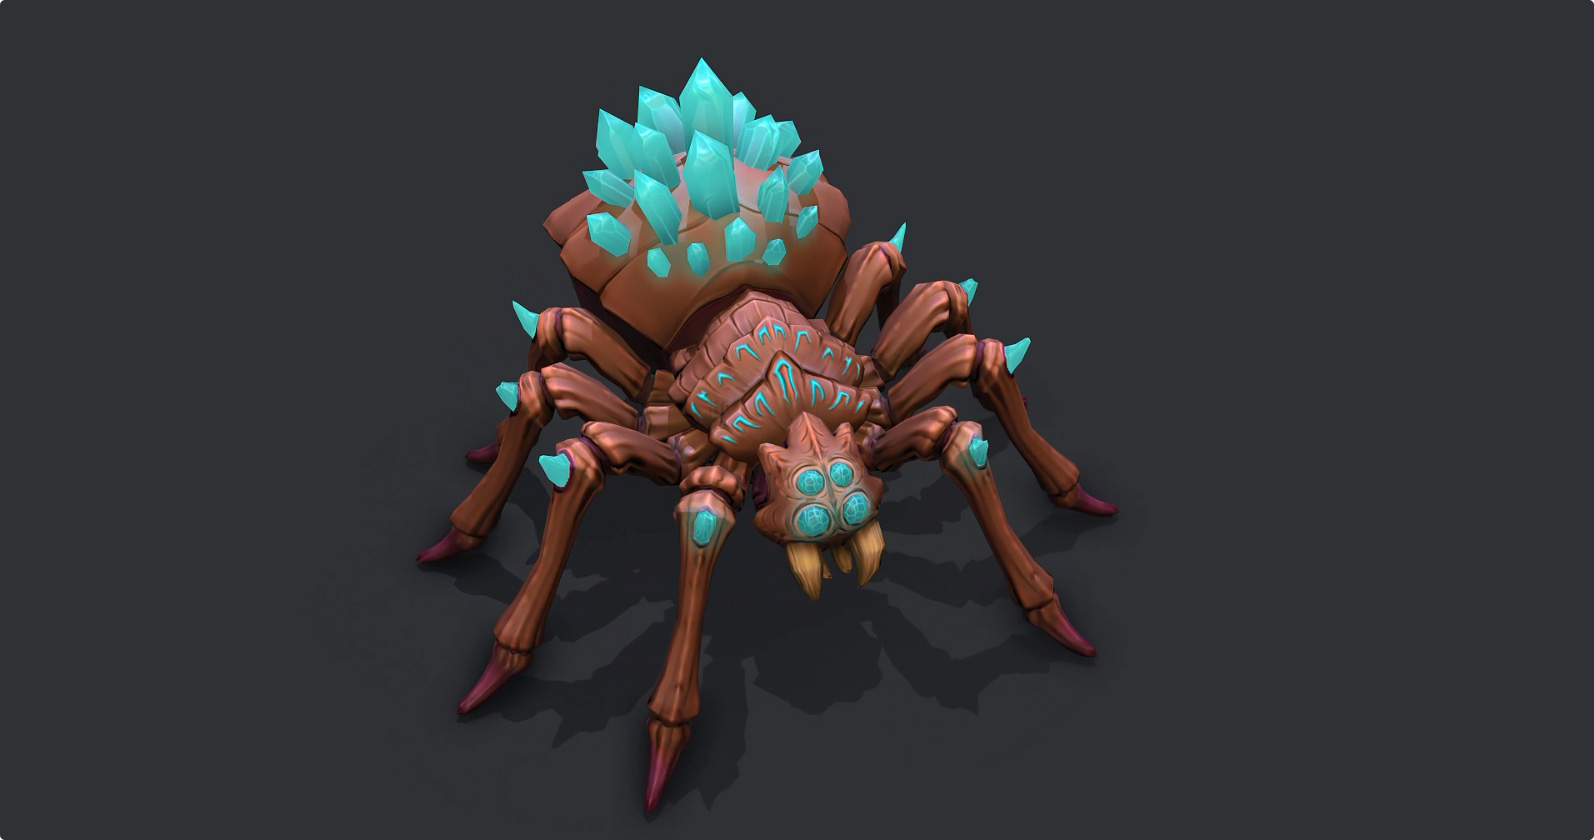 Magic Spider - game character design